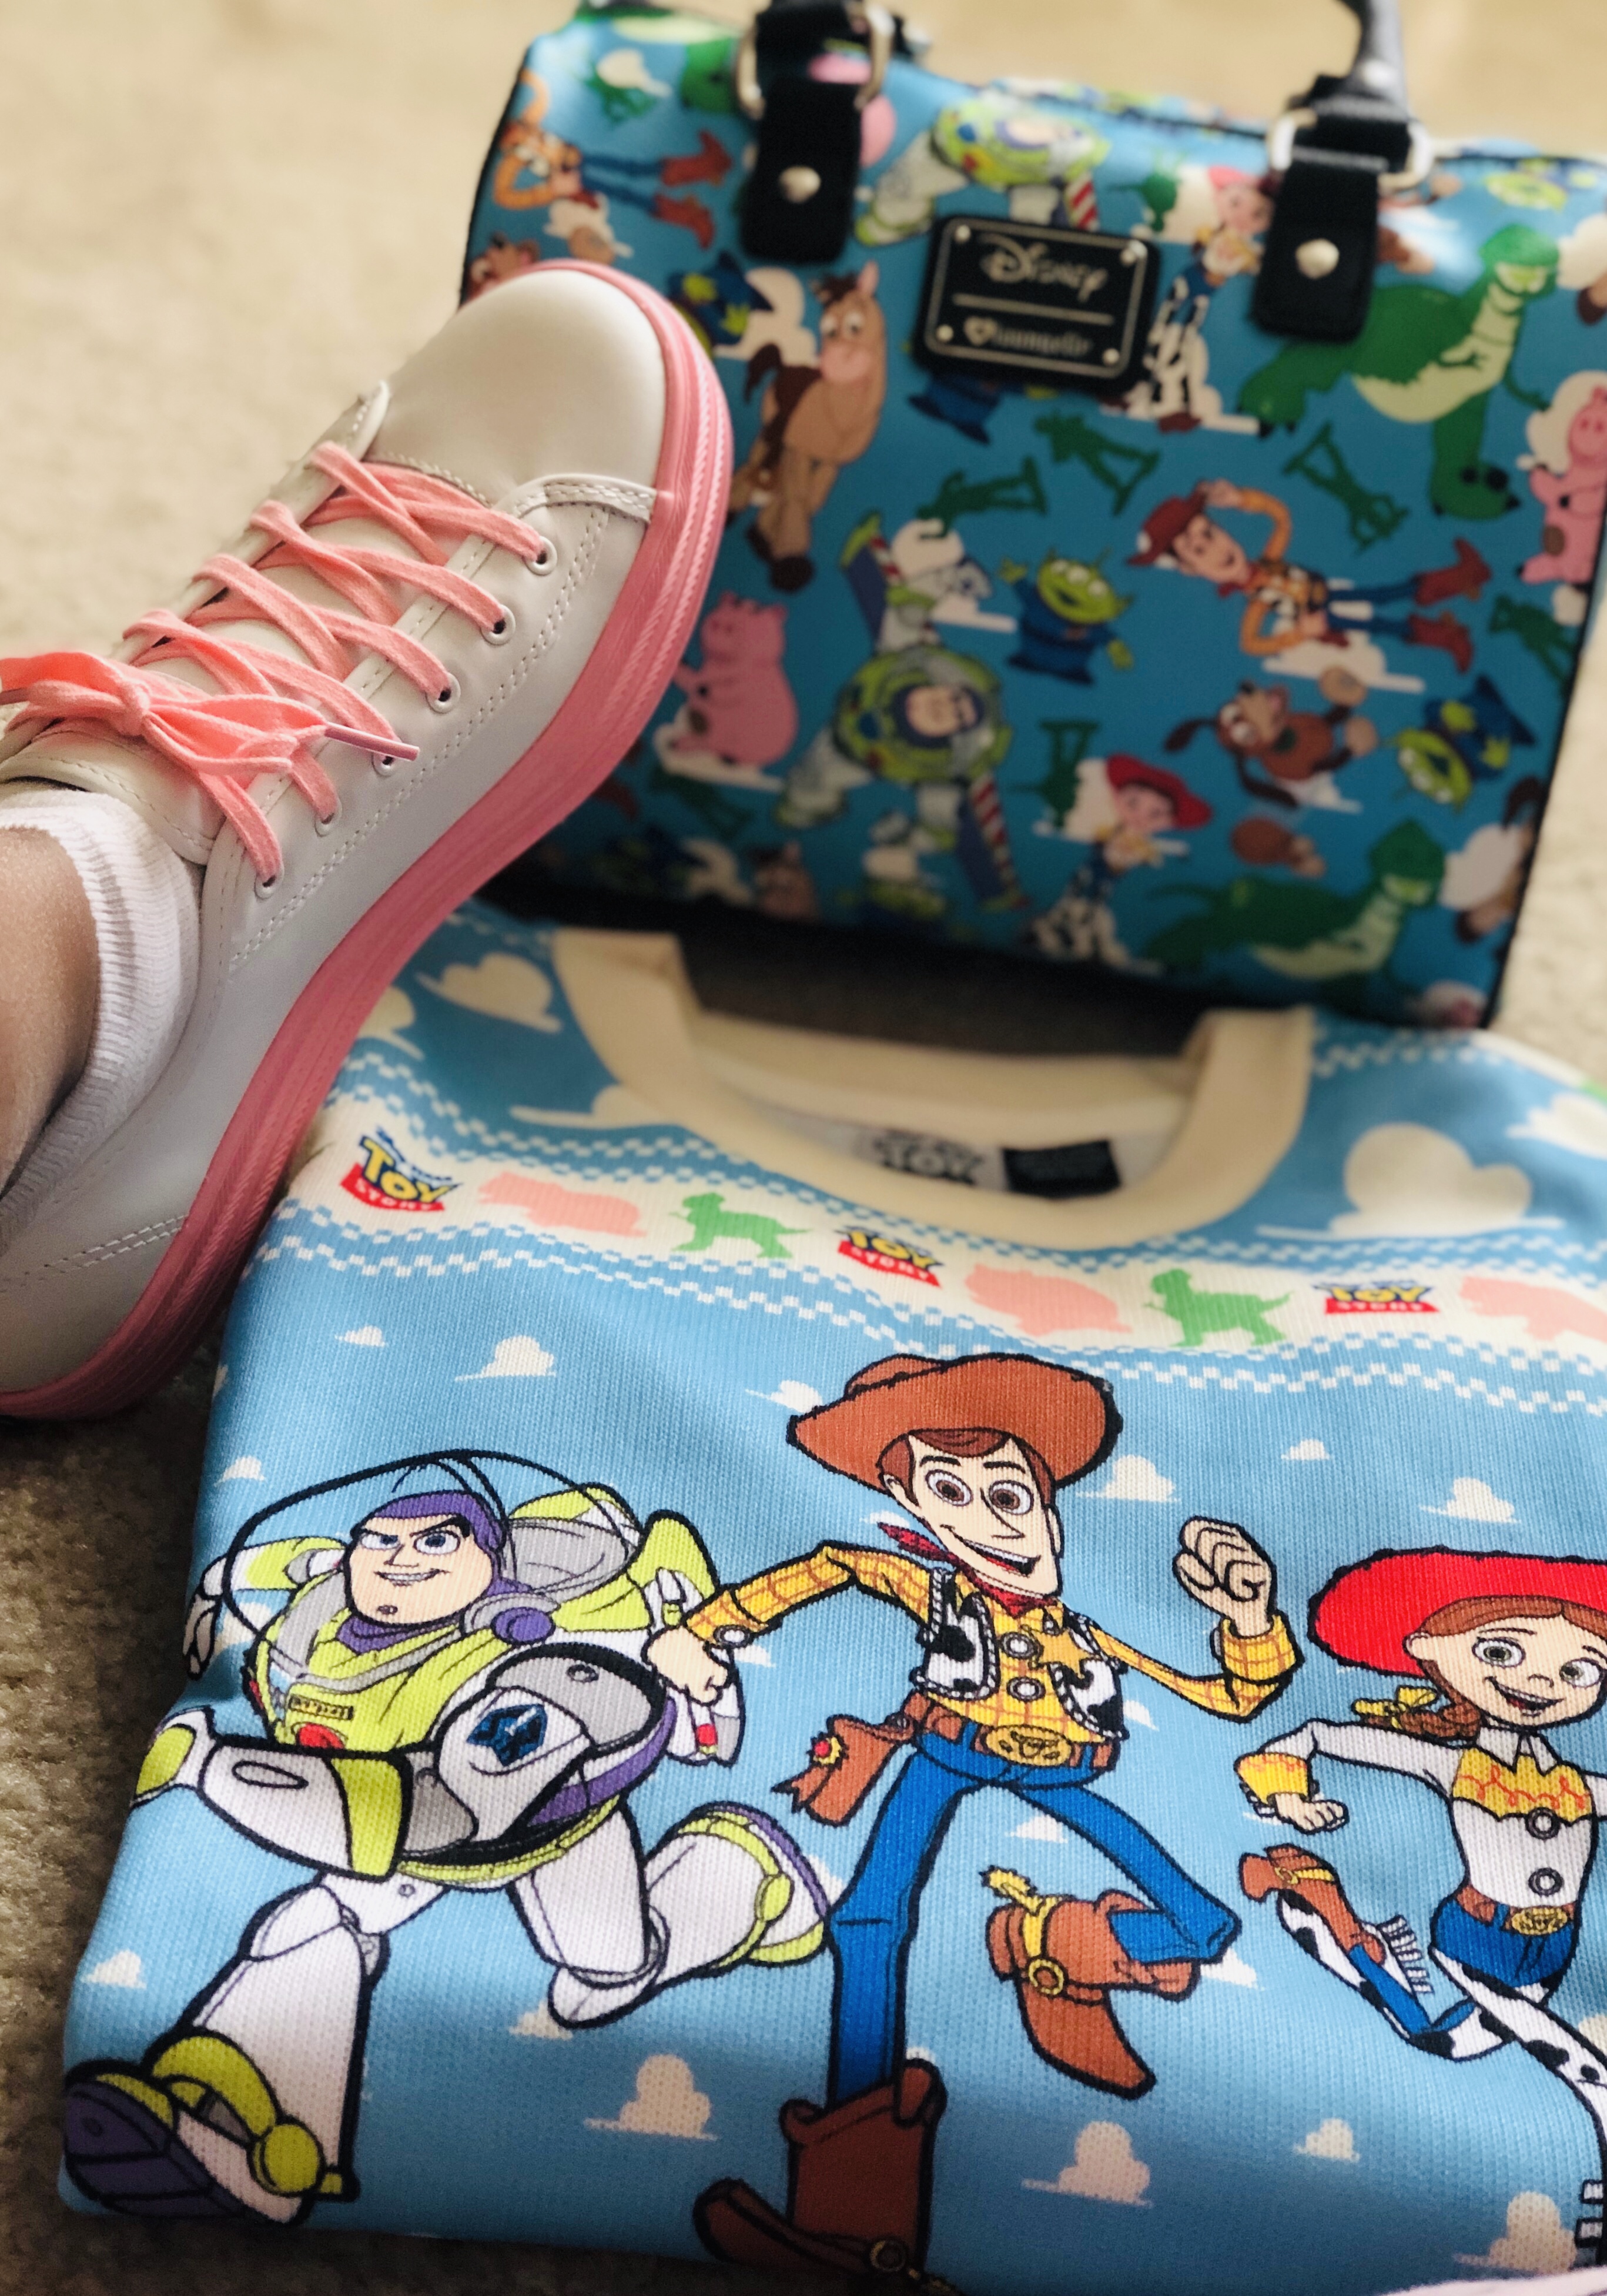 Fun Toy Story Sweater and Purse & A Press Trip To San Francisco